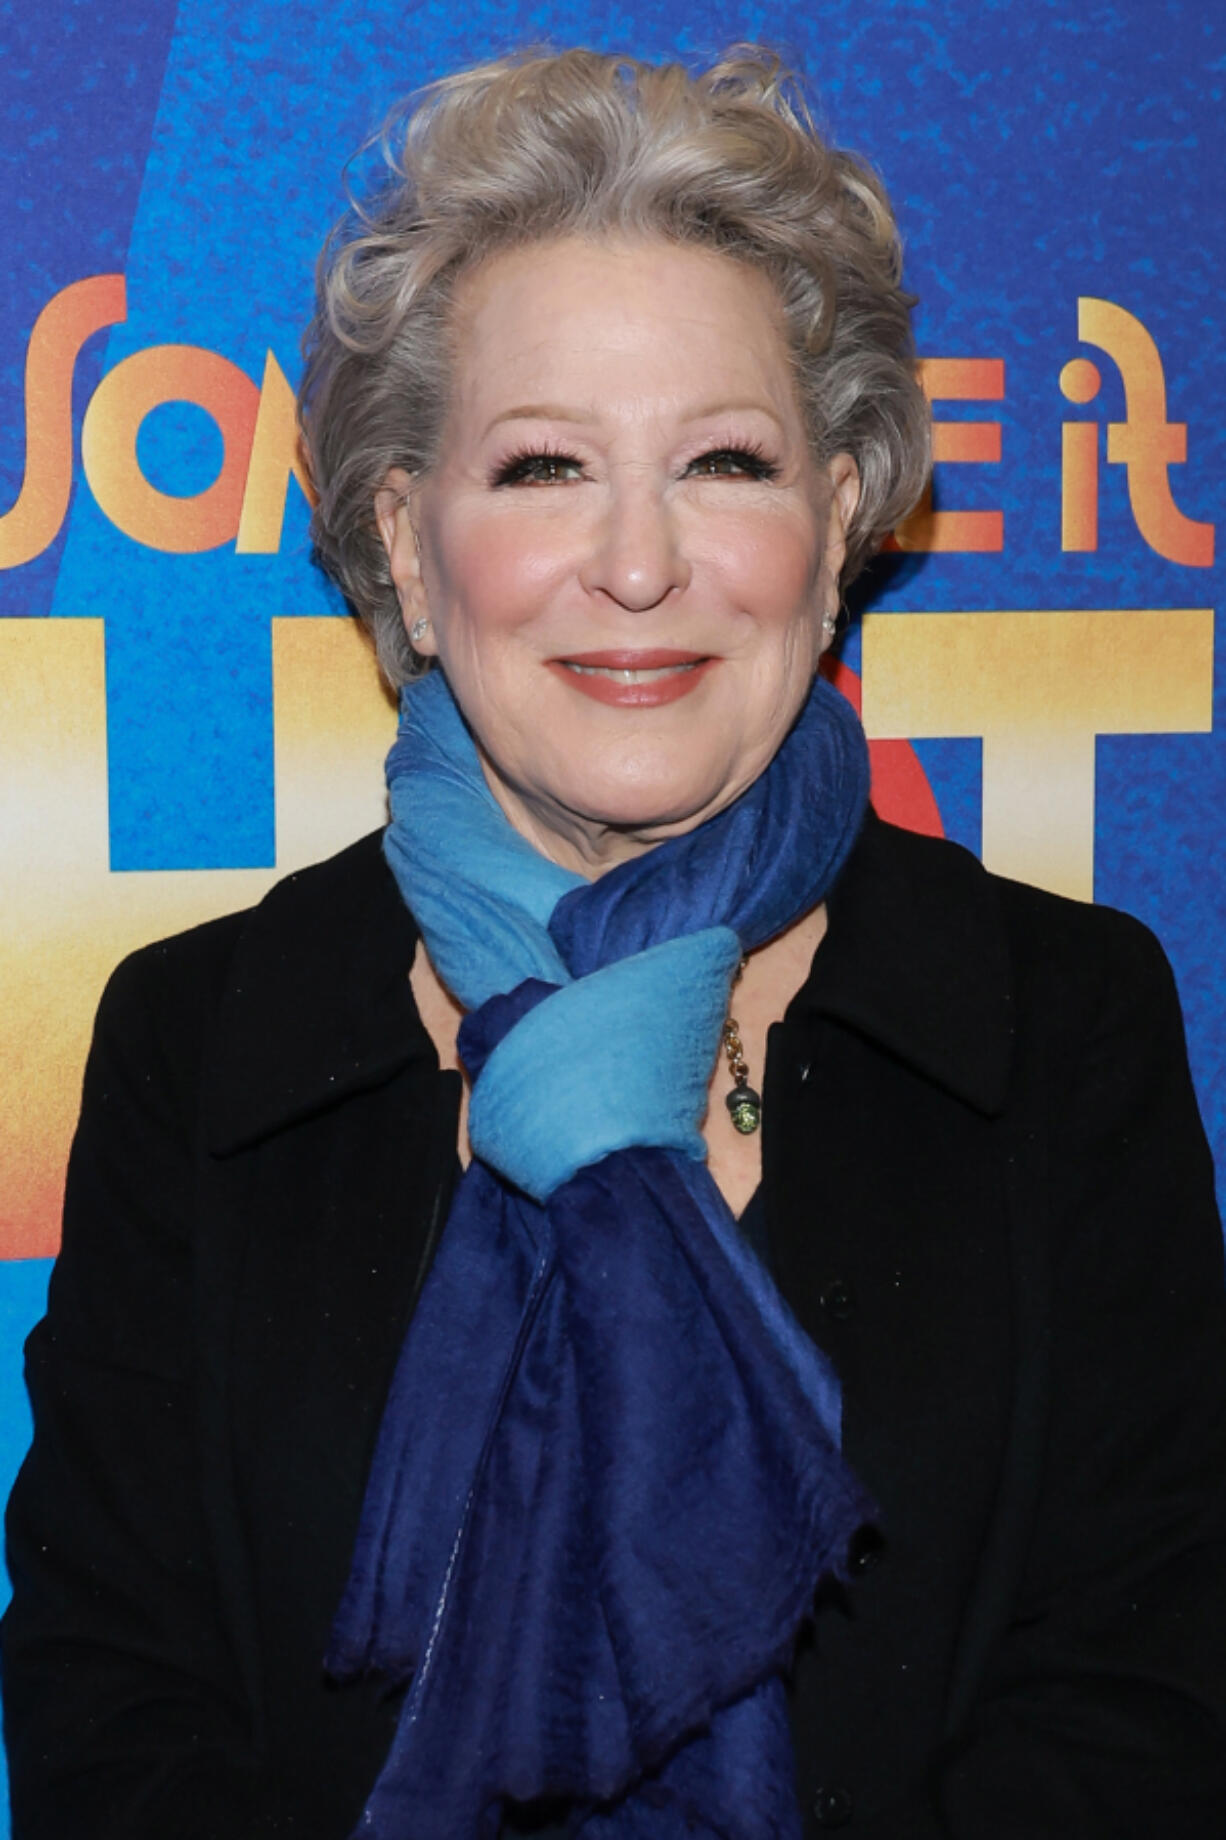 Bette Midler attends the &ldquo;Some Like It Hot&rdquo; Broadway opening night Dec. 11, 2022, at Shubert Theatre in New York City.